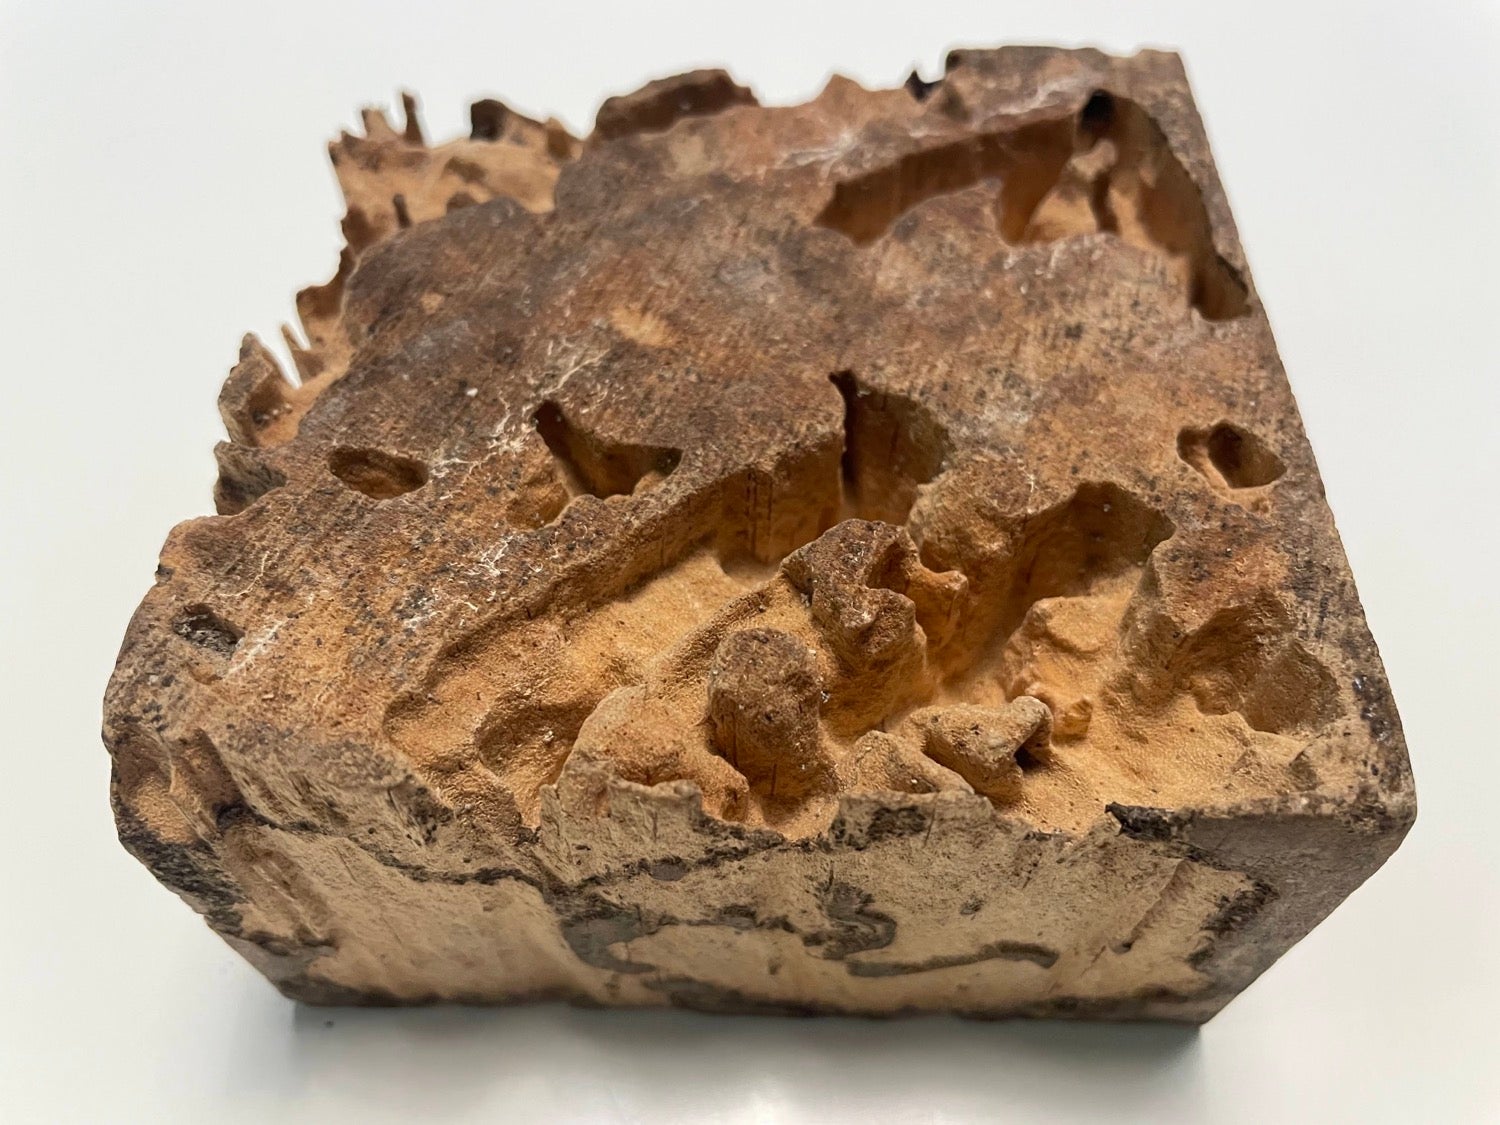 a block of wood with many channels and tunnels created by termites